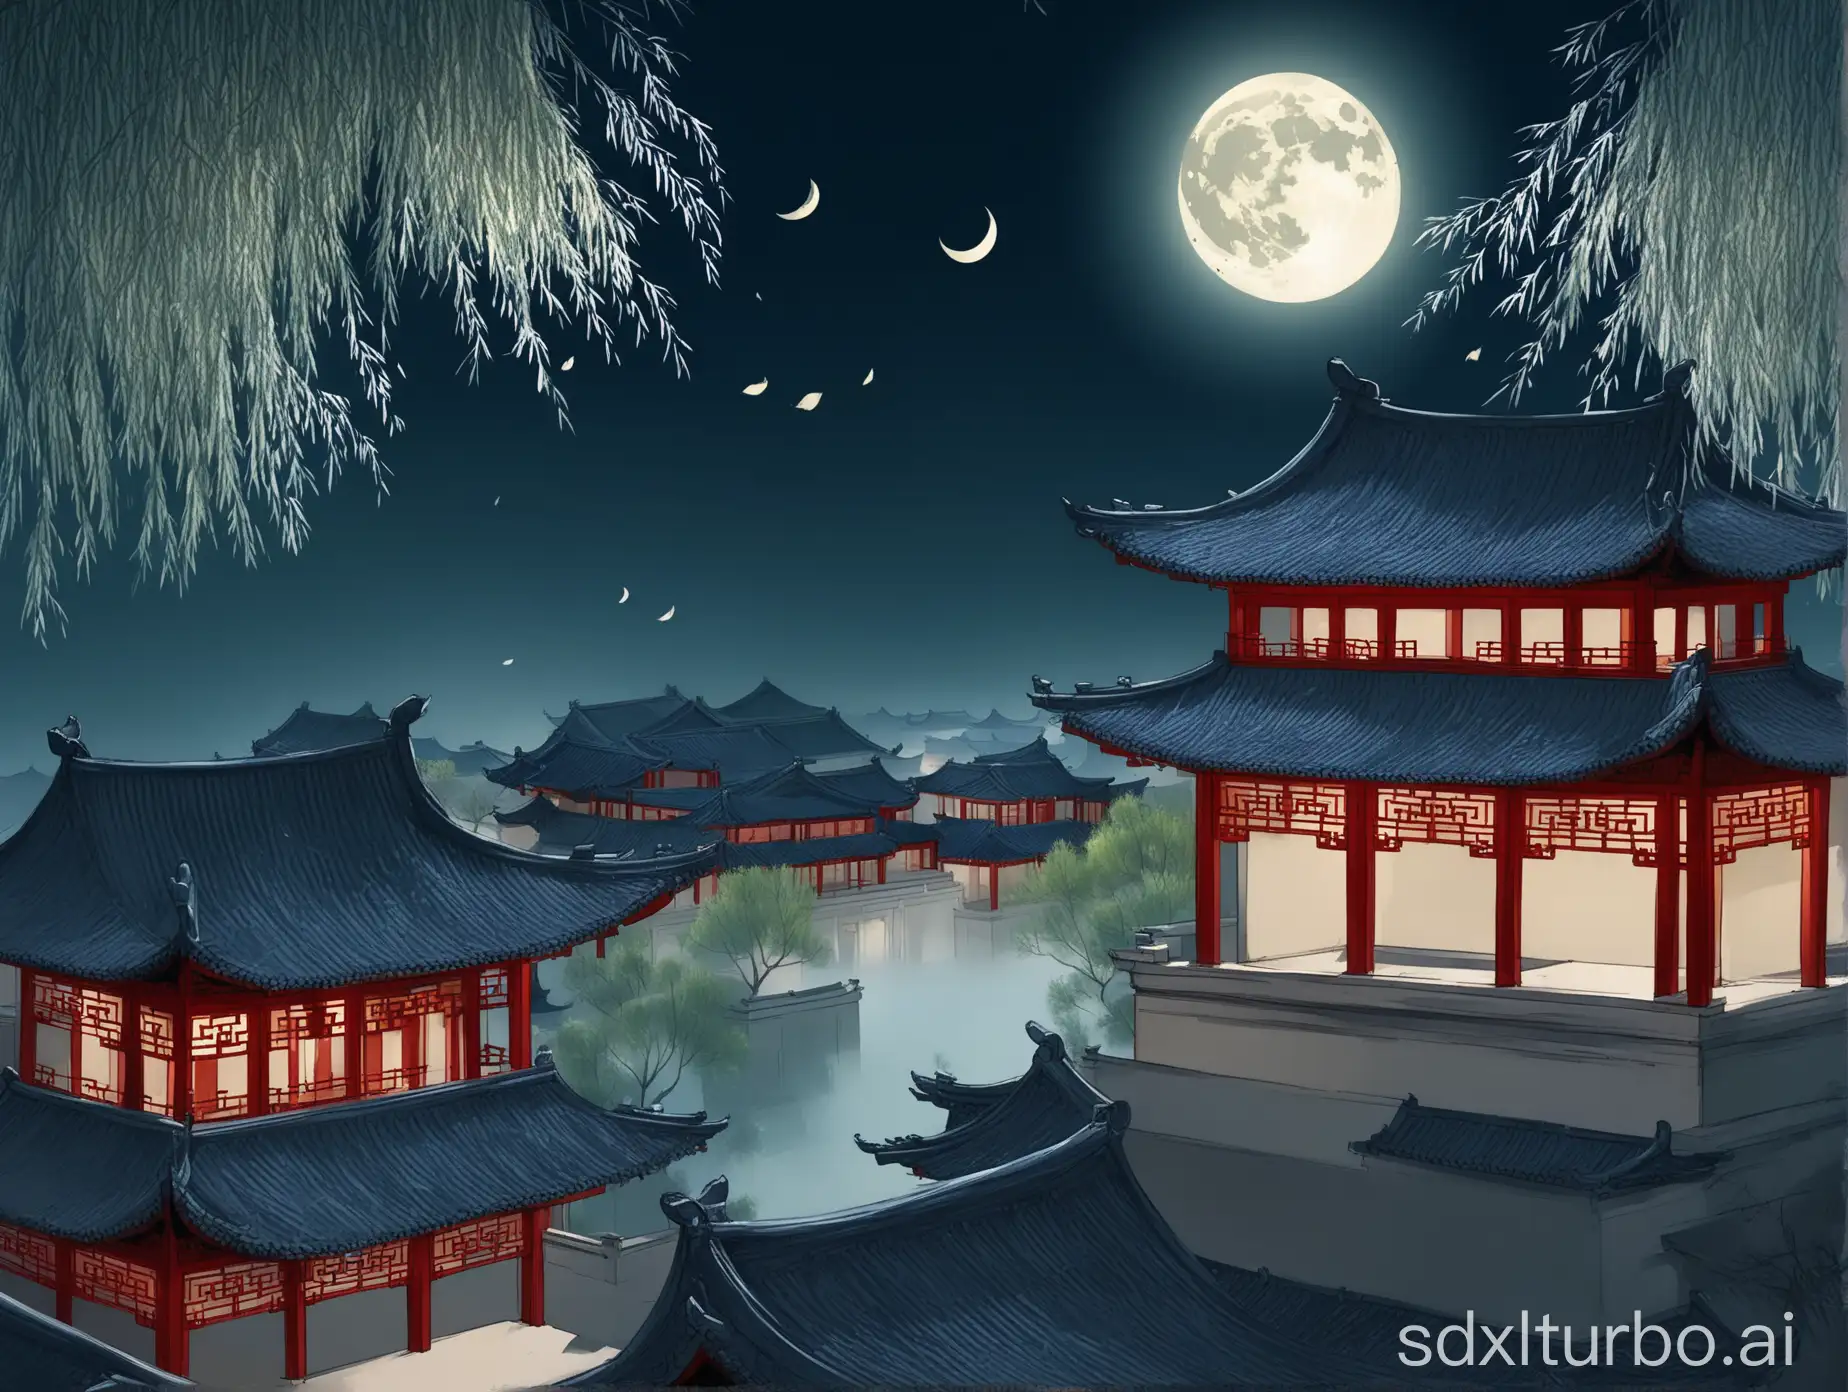 Serene-Moonlit-Night-Over-Traditional-Chinese-Architecture-with-Swaying-Willow-Trees